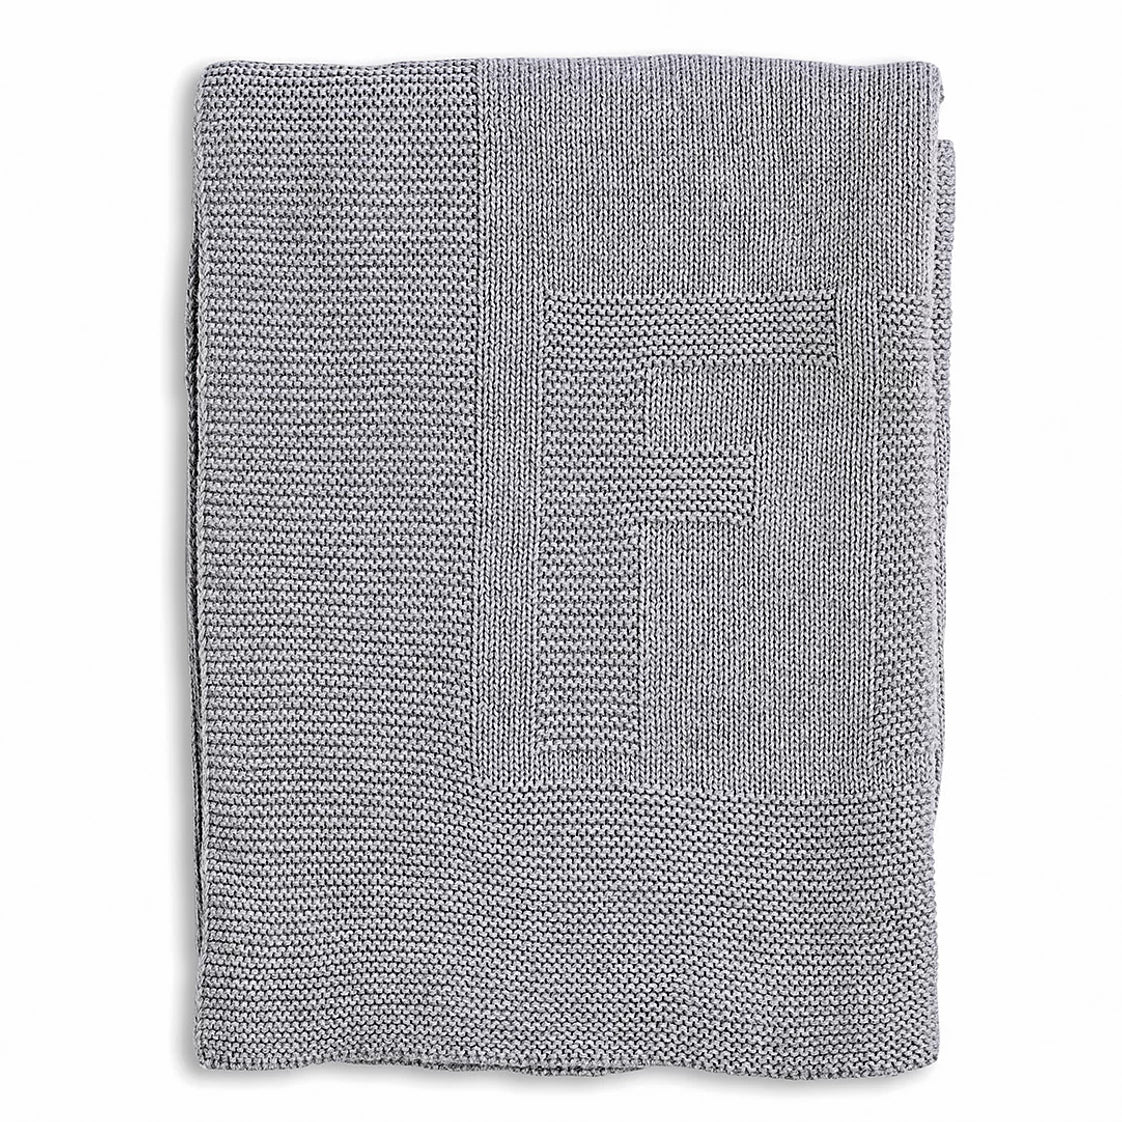 First Endless Grey Knitted Blanket in Cotton